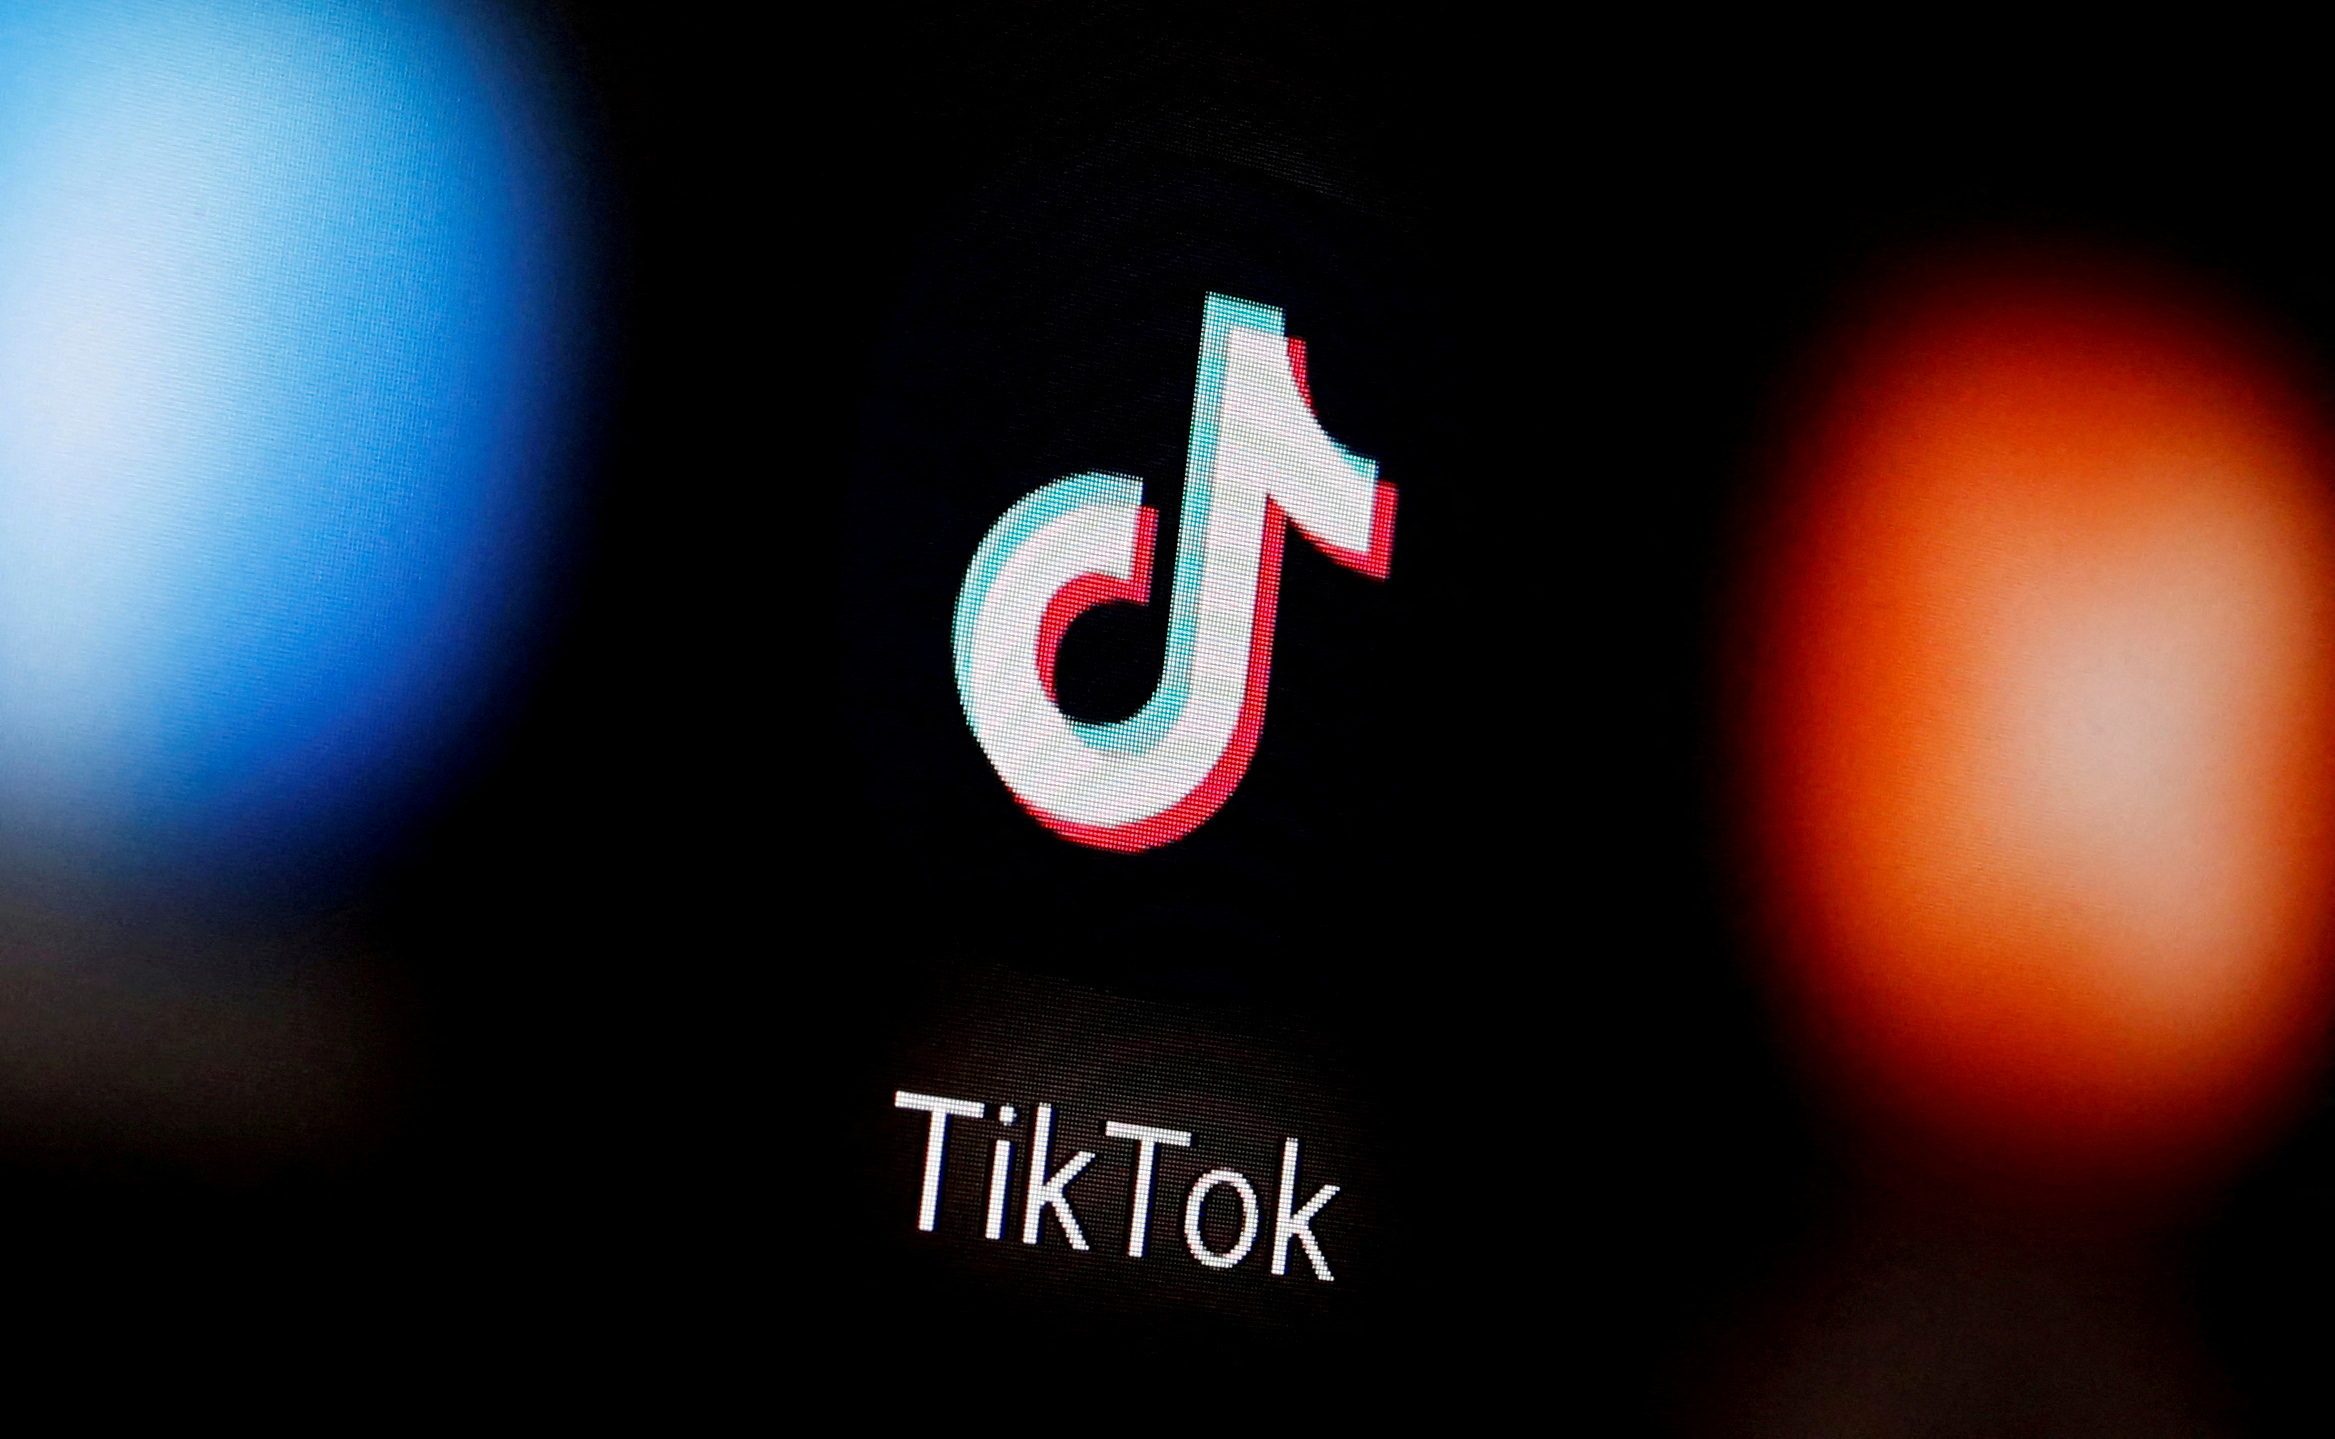 TikTok eyes up to $20b in e-commerce business this year